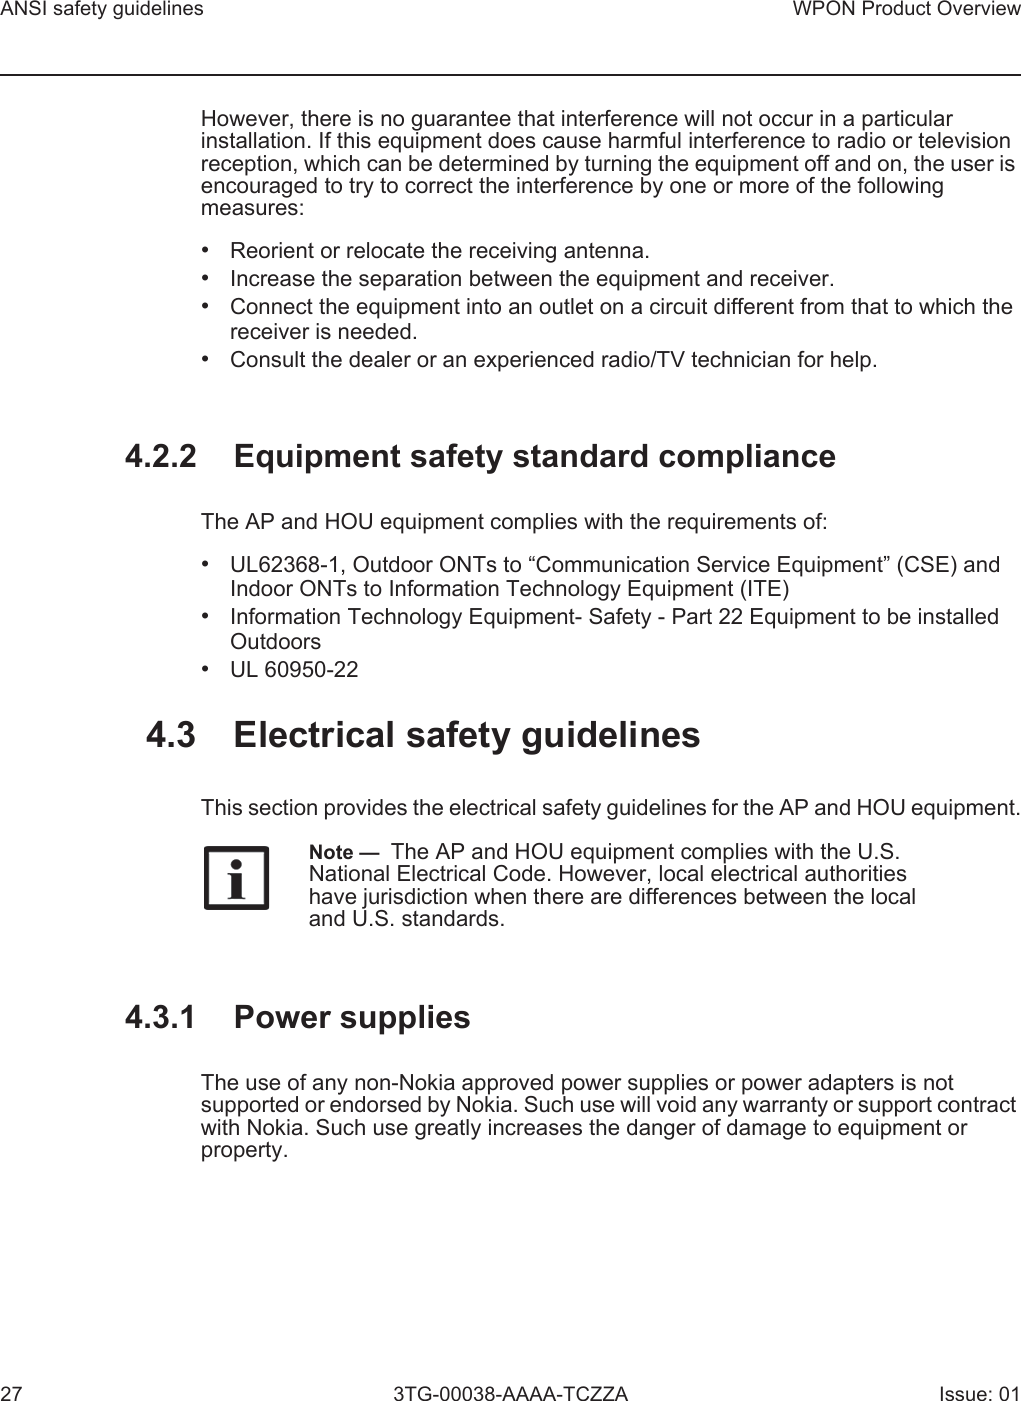 ANSI safety guidelines27WPON Product Overview3TG-00038-AAAA-TCZZA Issue: 01However, there is no guarantee that interference will not occur in a particular installation. If this equipment does cause harmful interference to radio or television reception, which can be determined by turning the equipment off and on, the user is encouraged to try to correct the interference by one or more of the following measures:•Reorient or relocate the receiving antenna.•Increase the separation between the equipment and receiver.•Connect the equipment into an outlet on a circuit different from that to which thereceiver is needed.•Consult the dealer or an experienced radio/TV technician for help.4.2.2 Equipment safety standard complianceThe AP and HOU equipment complies with the requirements of: •UL62368-1, Outdoor ONTs to “Communication Service Equipment” (CSE) andIndoor ONTs to Information Technology Equipment (ITE)•Information Technology Equipment- Safety - Part 22 Equipment to be installedOutdoors•UL 60950-224.3 Electrical safety guidelinesThis section provides the electrical safety guidelines for the AP and HOU equipment.4.3.1 Power suppliesThe use of any non-Nokia approved power supplies or power adapters is not supported or endorsed by Nokia. Such use will void any warranty or support contract with Nokia. Such use greatly increases the danger of damage to equipment or property.Note —  The AP and HOU equipment complies with the U.S. National Electrical Code. However, local electrical authorities have jurisdiction when there are differences between the local and U.S. standards.